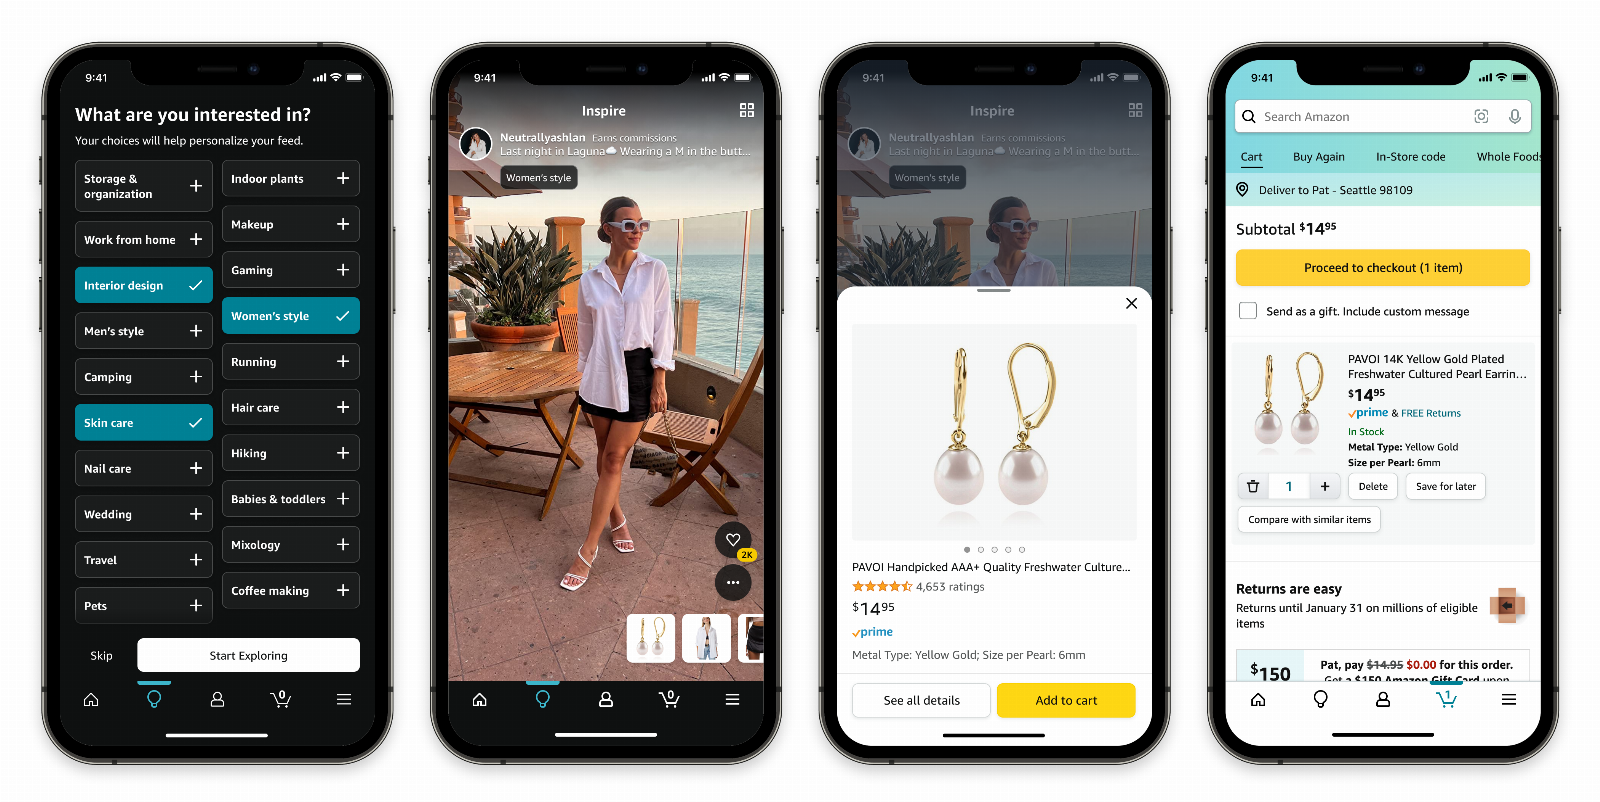 Amazon’s TikTok-like Inspire shopping feed is now available to all customers in the US